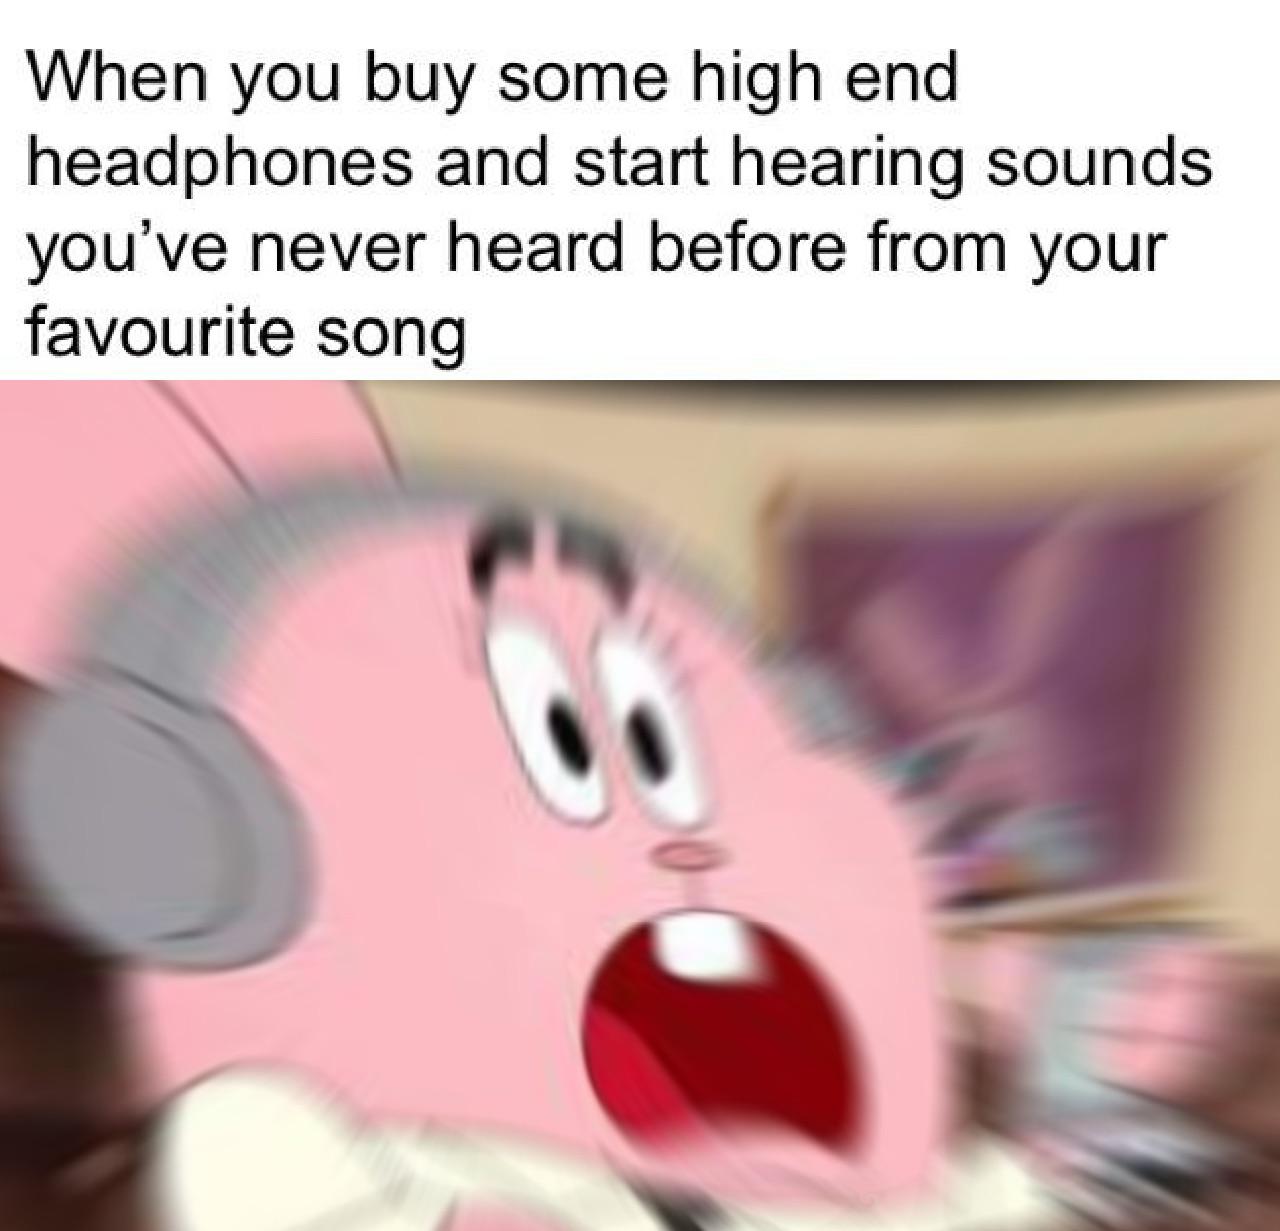 funny gaming memes - high end headphones memes - When you buy some high end headphones and start hearing sounds you've never heard before from your favourite song